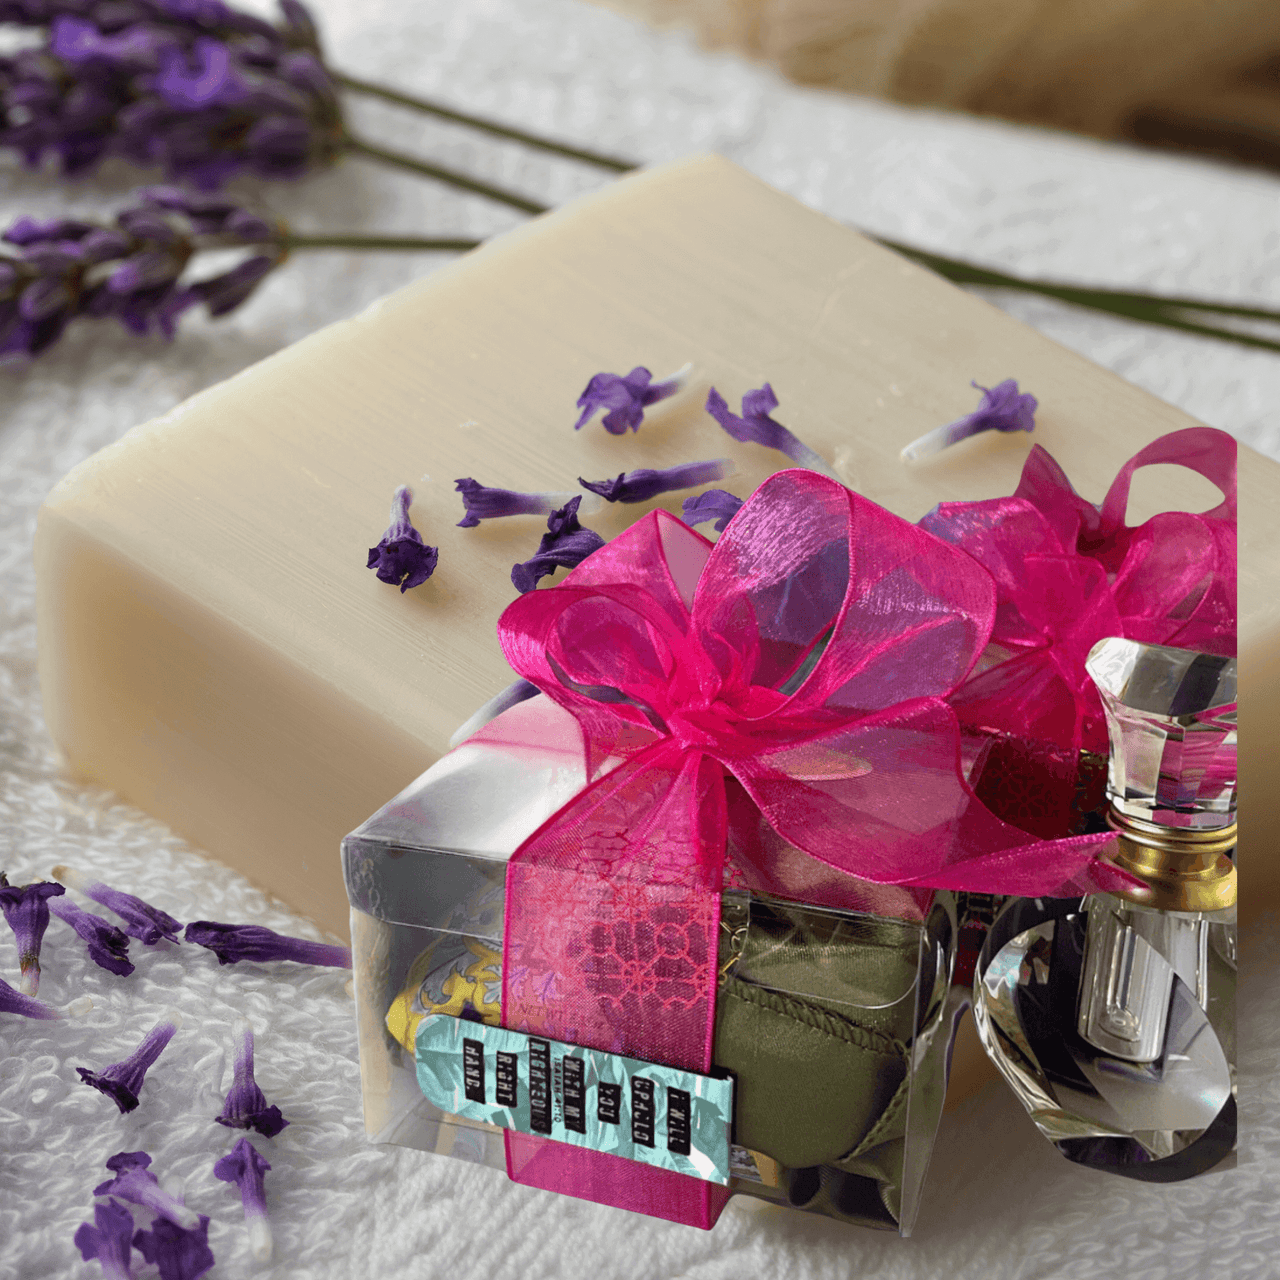 Artisan handcrafted bar soap with luxe wrapped gift box, lavender sprigs, and pink bow accents.